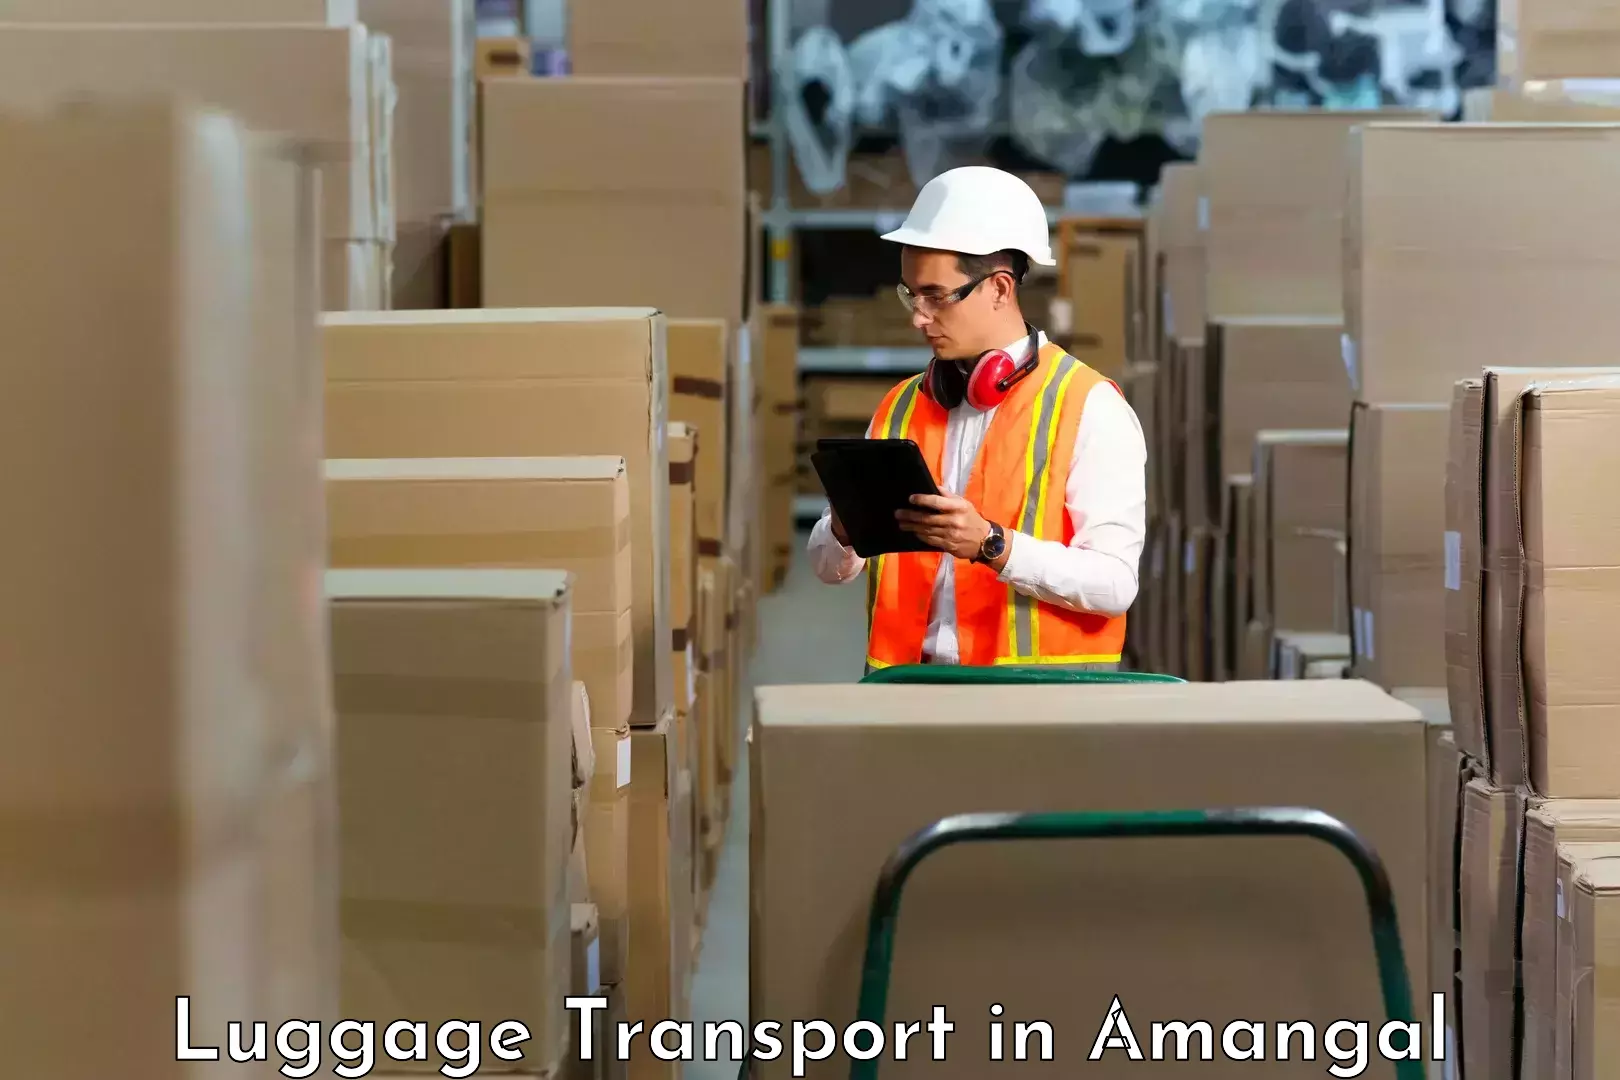 Luggage transport guidelines in Amangal